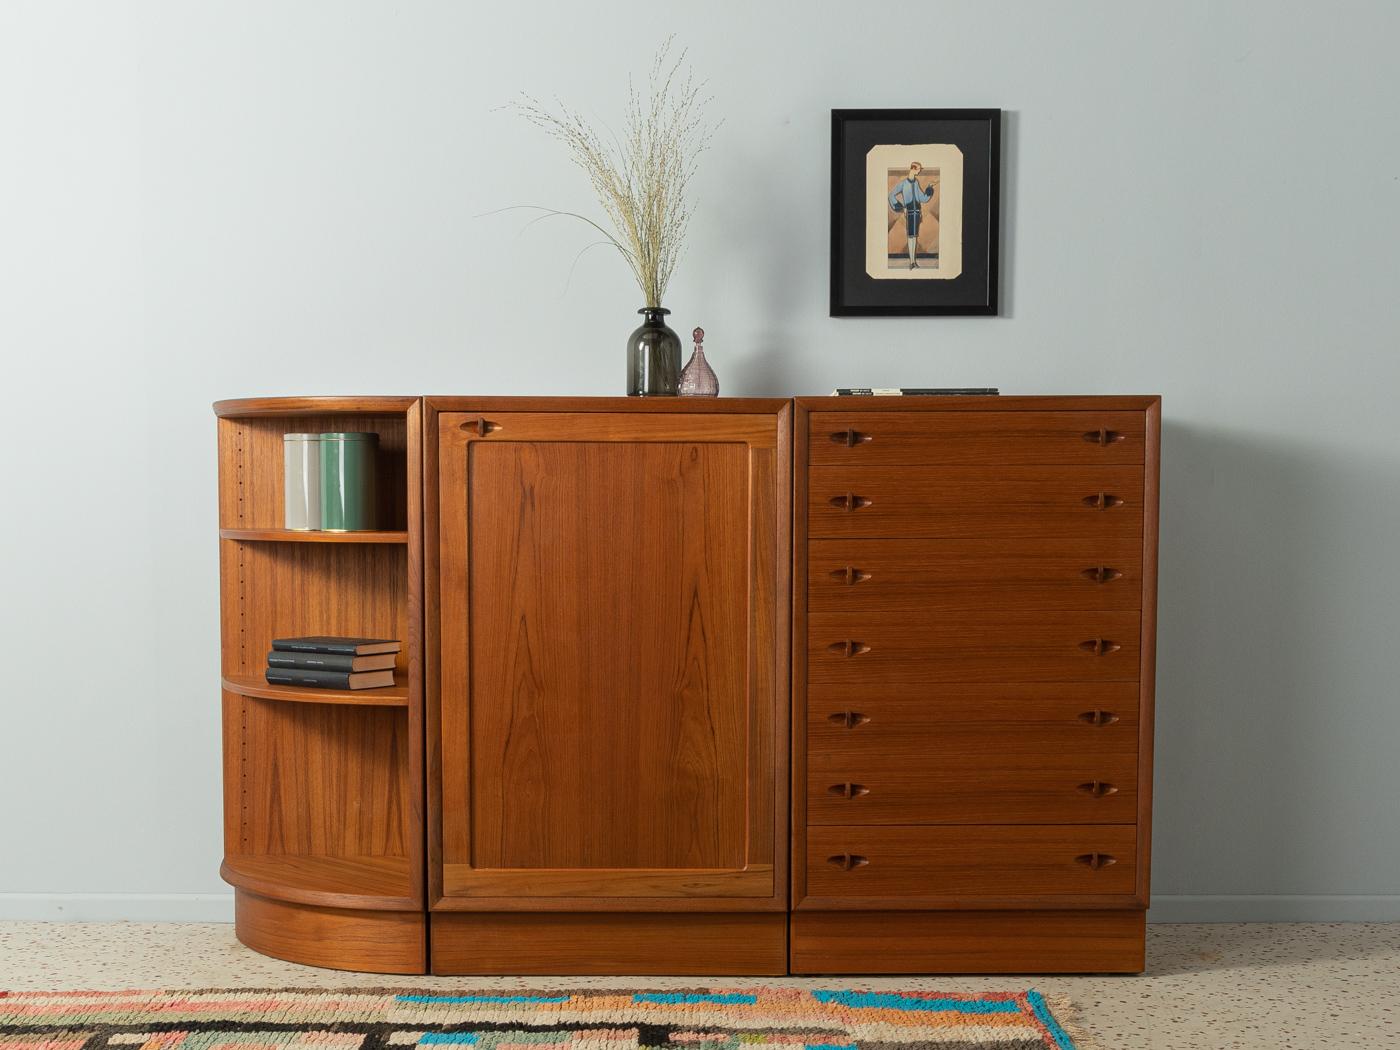 Wonderful dressers from the 1960s in Scandinavian design in teak veneer. One corpus with seven drawers, one corpus with three open book compartments, and a third corpus with one door and two shelves. All dressers stand on separate bases in teak, the